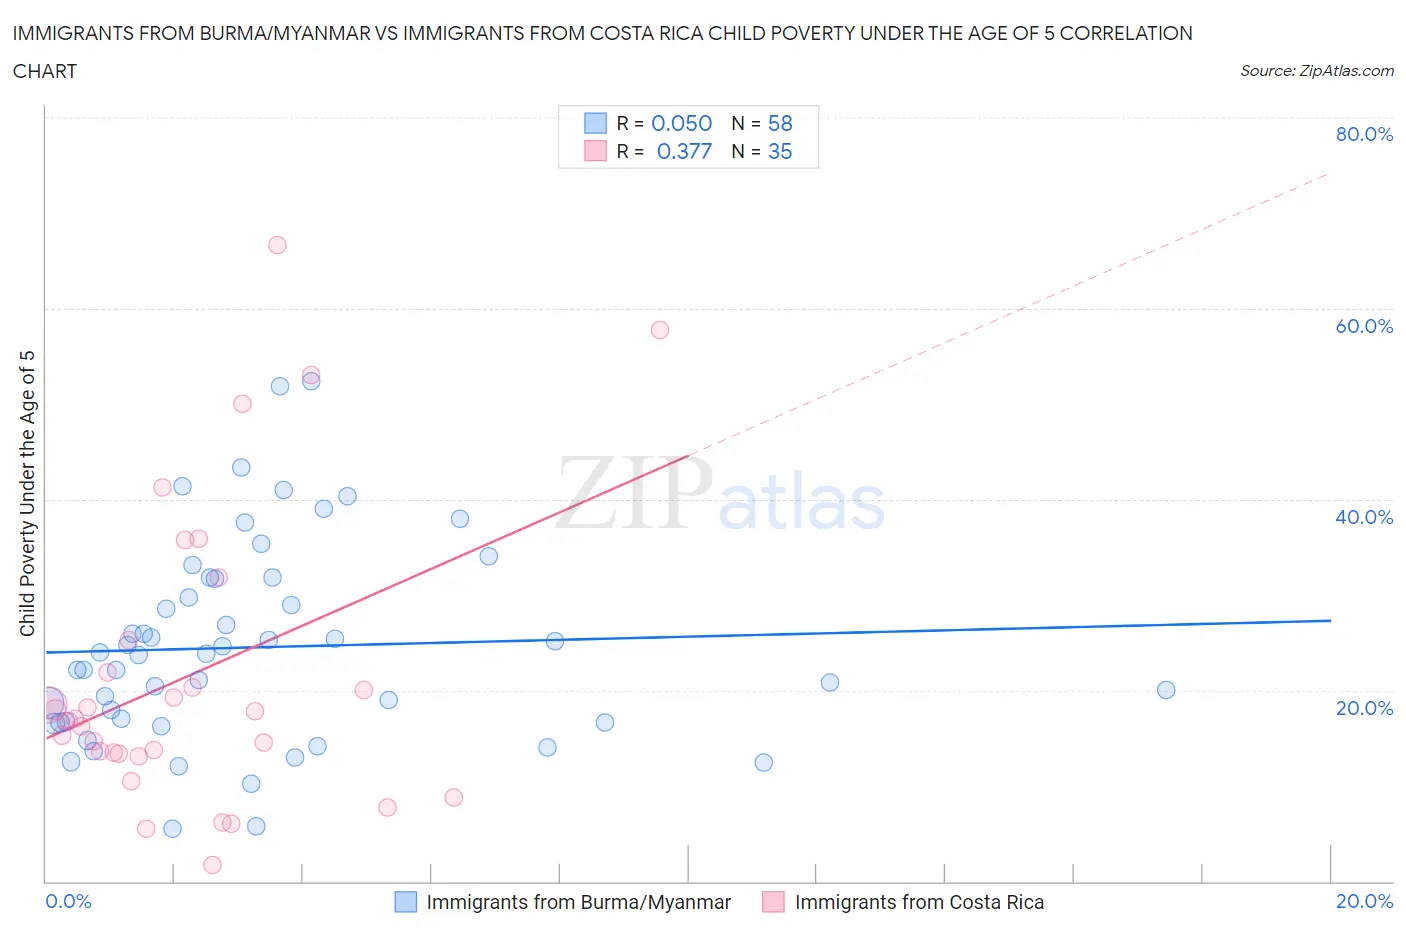 Immigrants from Burma/Myanmar vs Immigrants from Costa Rica Child Poverty Under the Age of 5